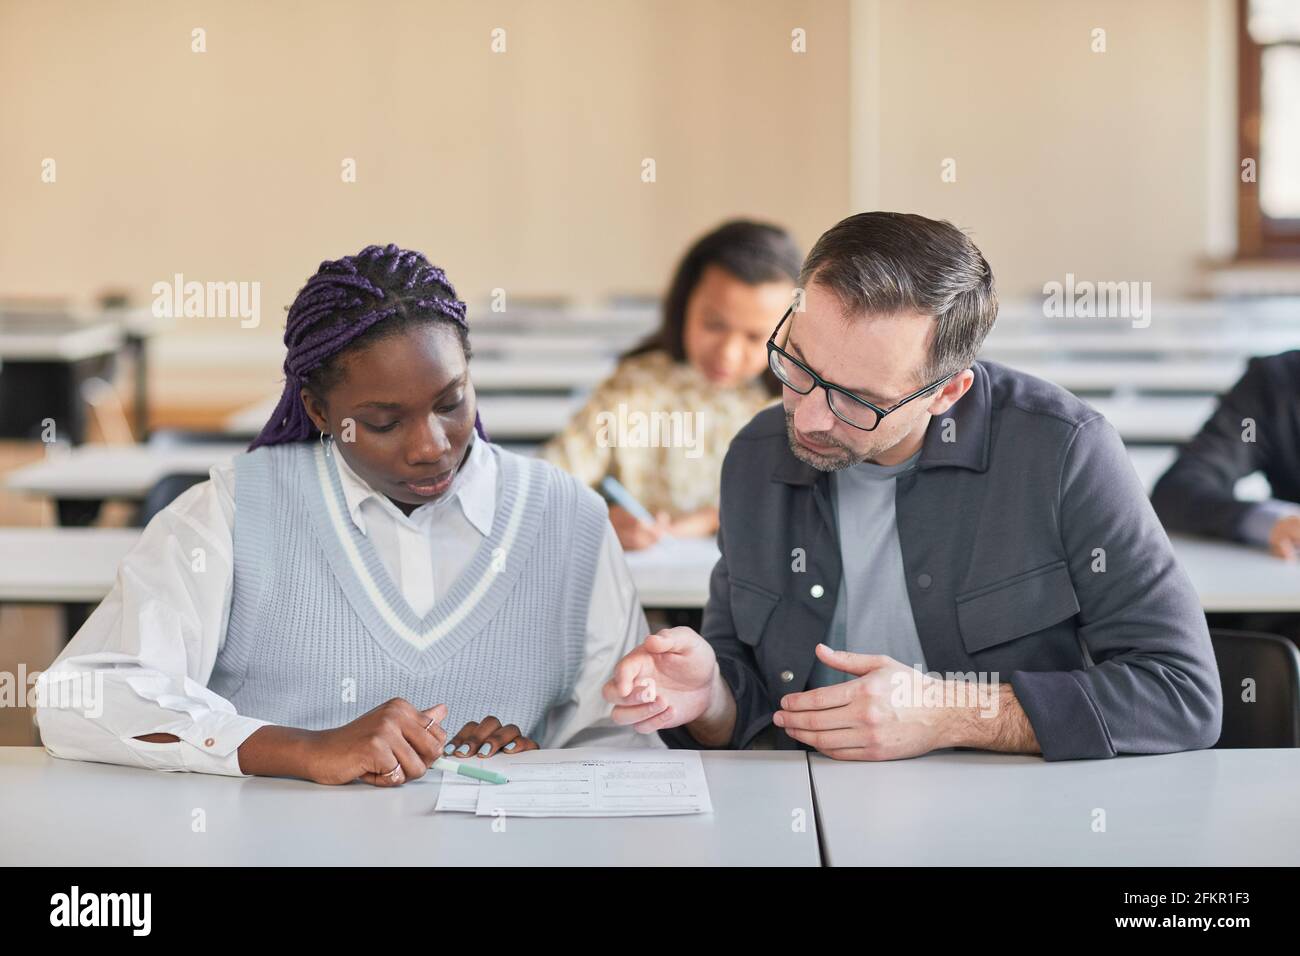 Portrait of mature professor helping African-American woman studying in college auditorium, copy space Stock Photo